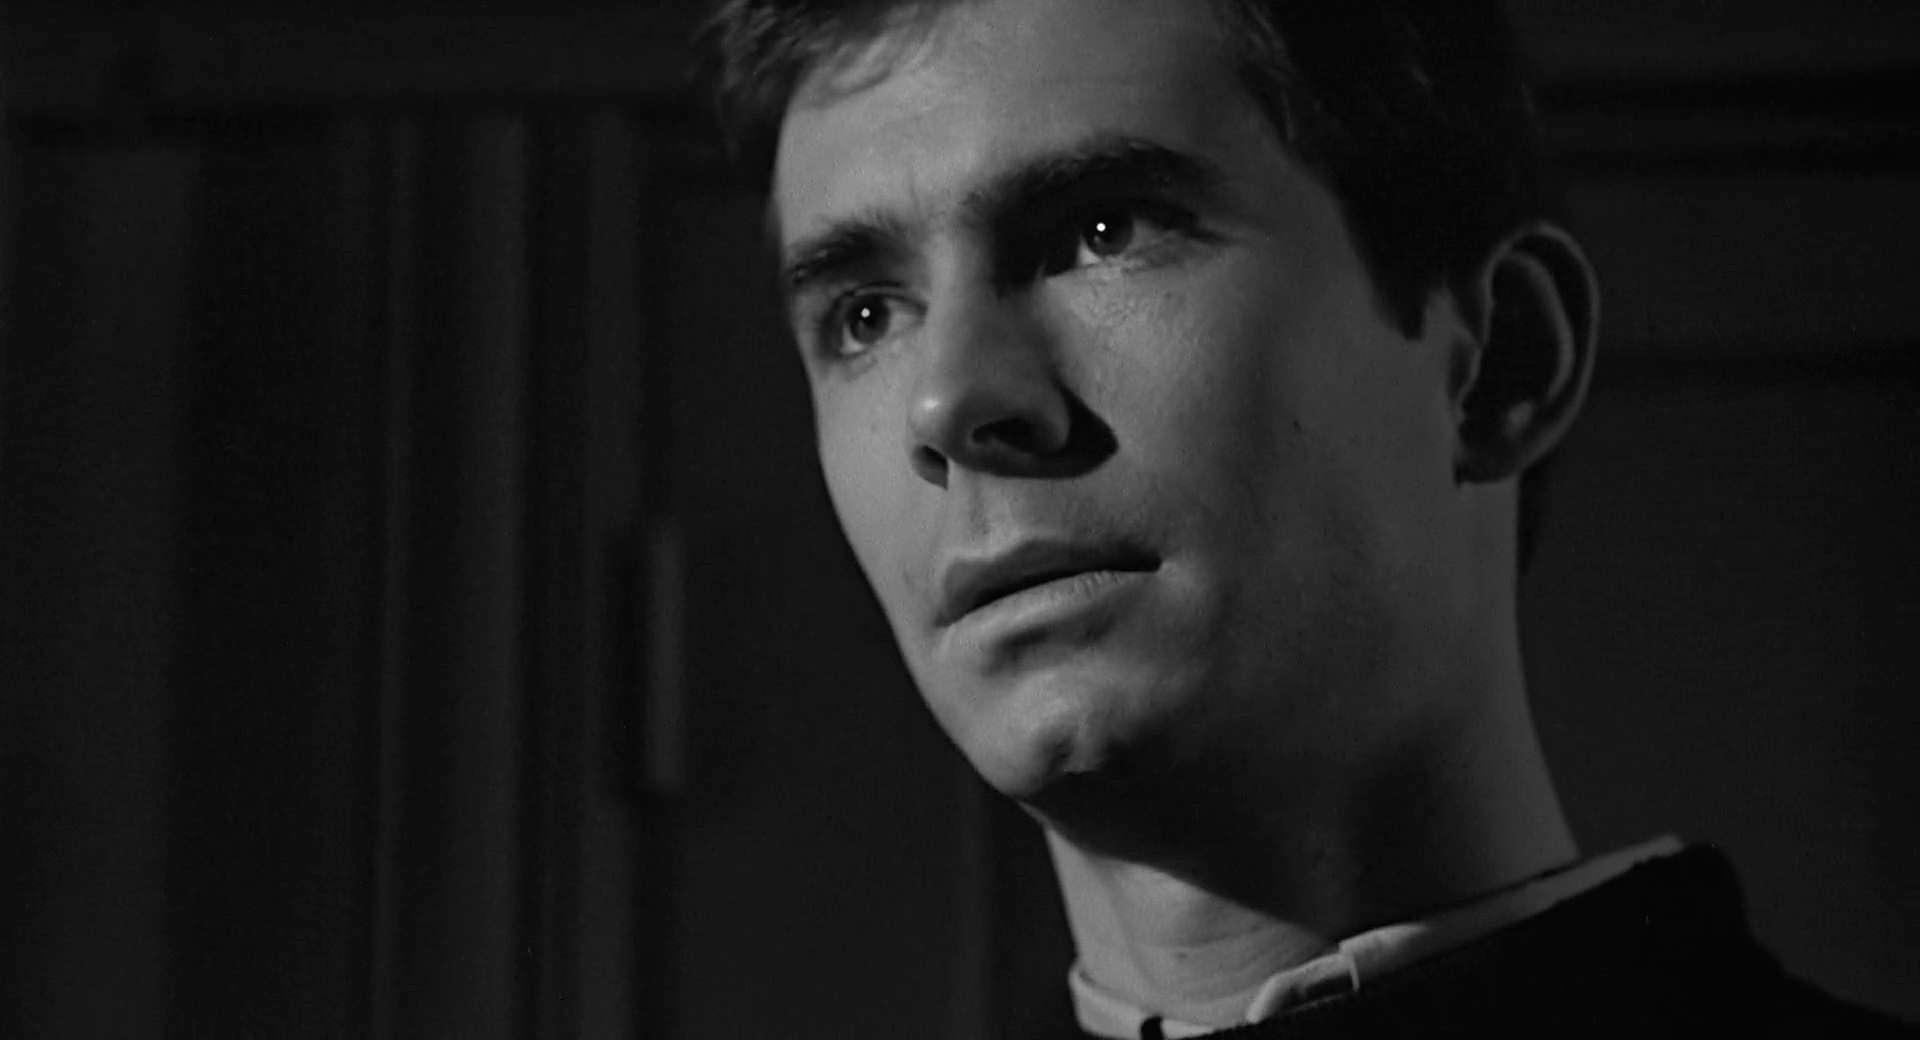 Anthony Perkins in Psycho